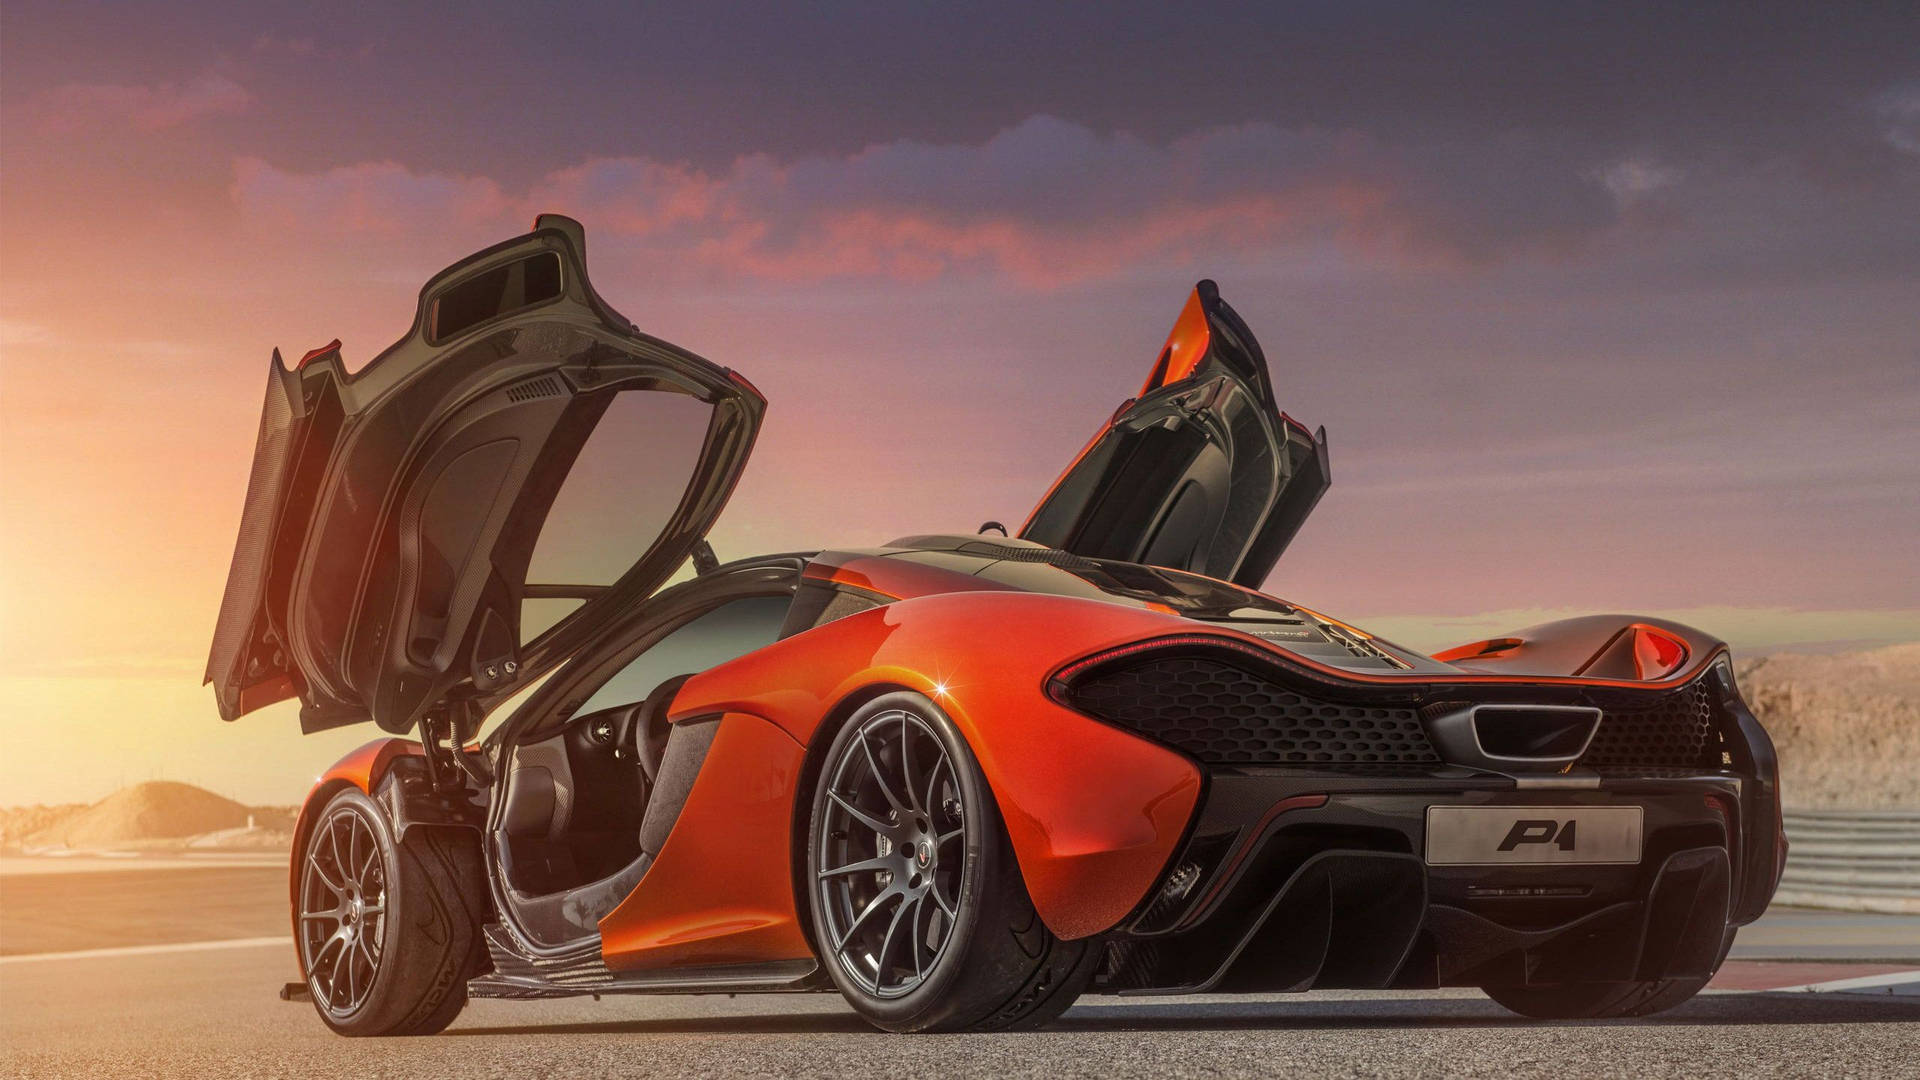 Really Cool Cars Mclaren Volcano Background